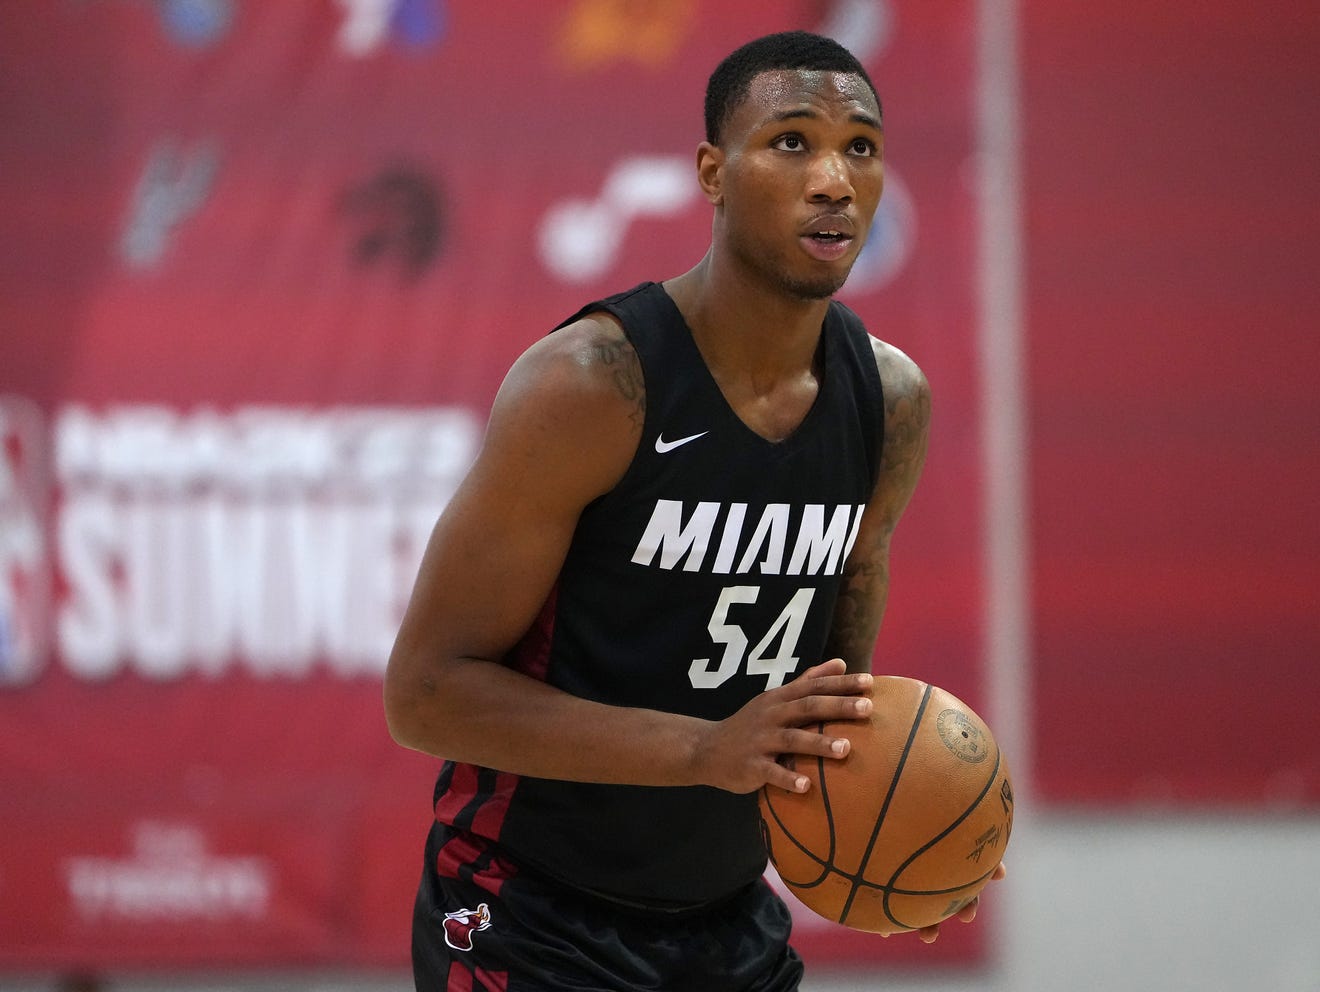 Miami Heat signs exMarquette player Jamal Cain to Exhibit 10 contract